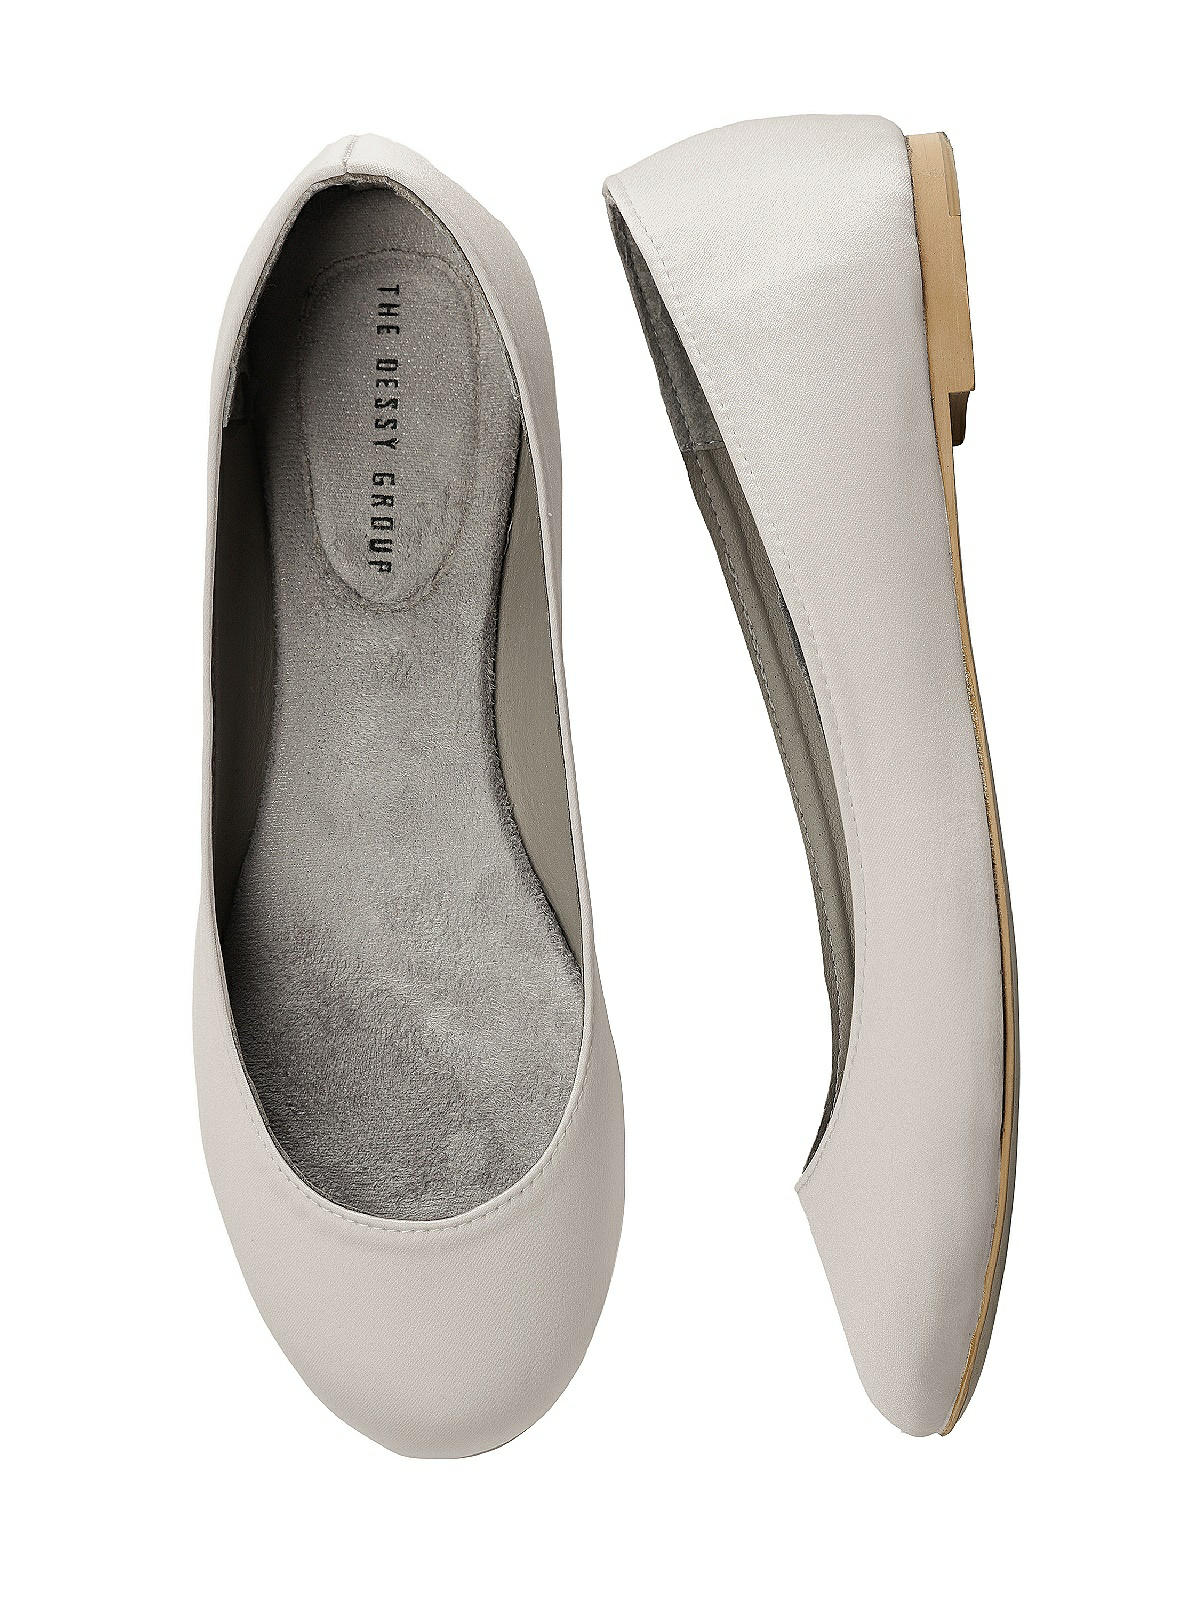 Simple Satin Ballet Wedding Flats In Oyster